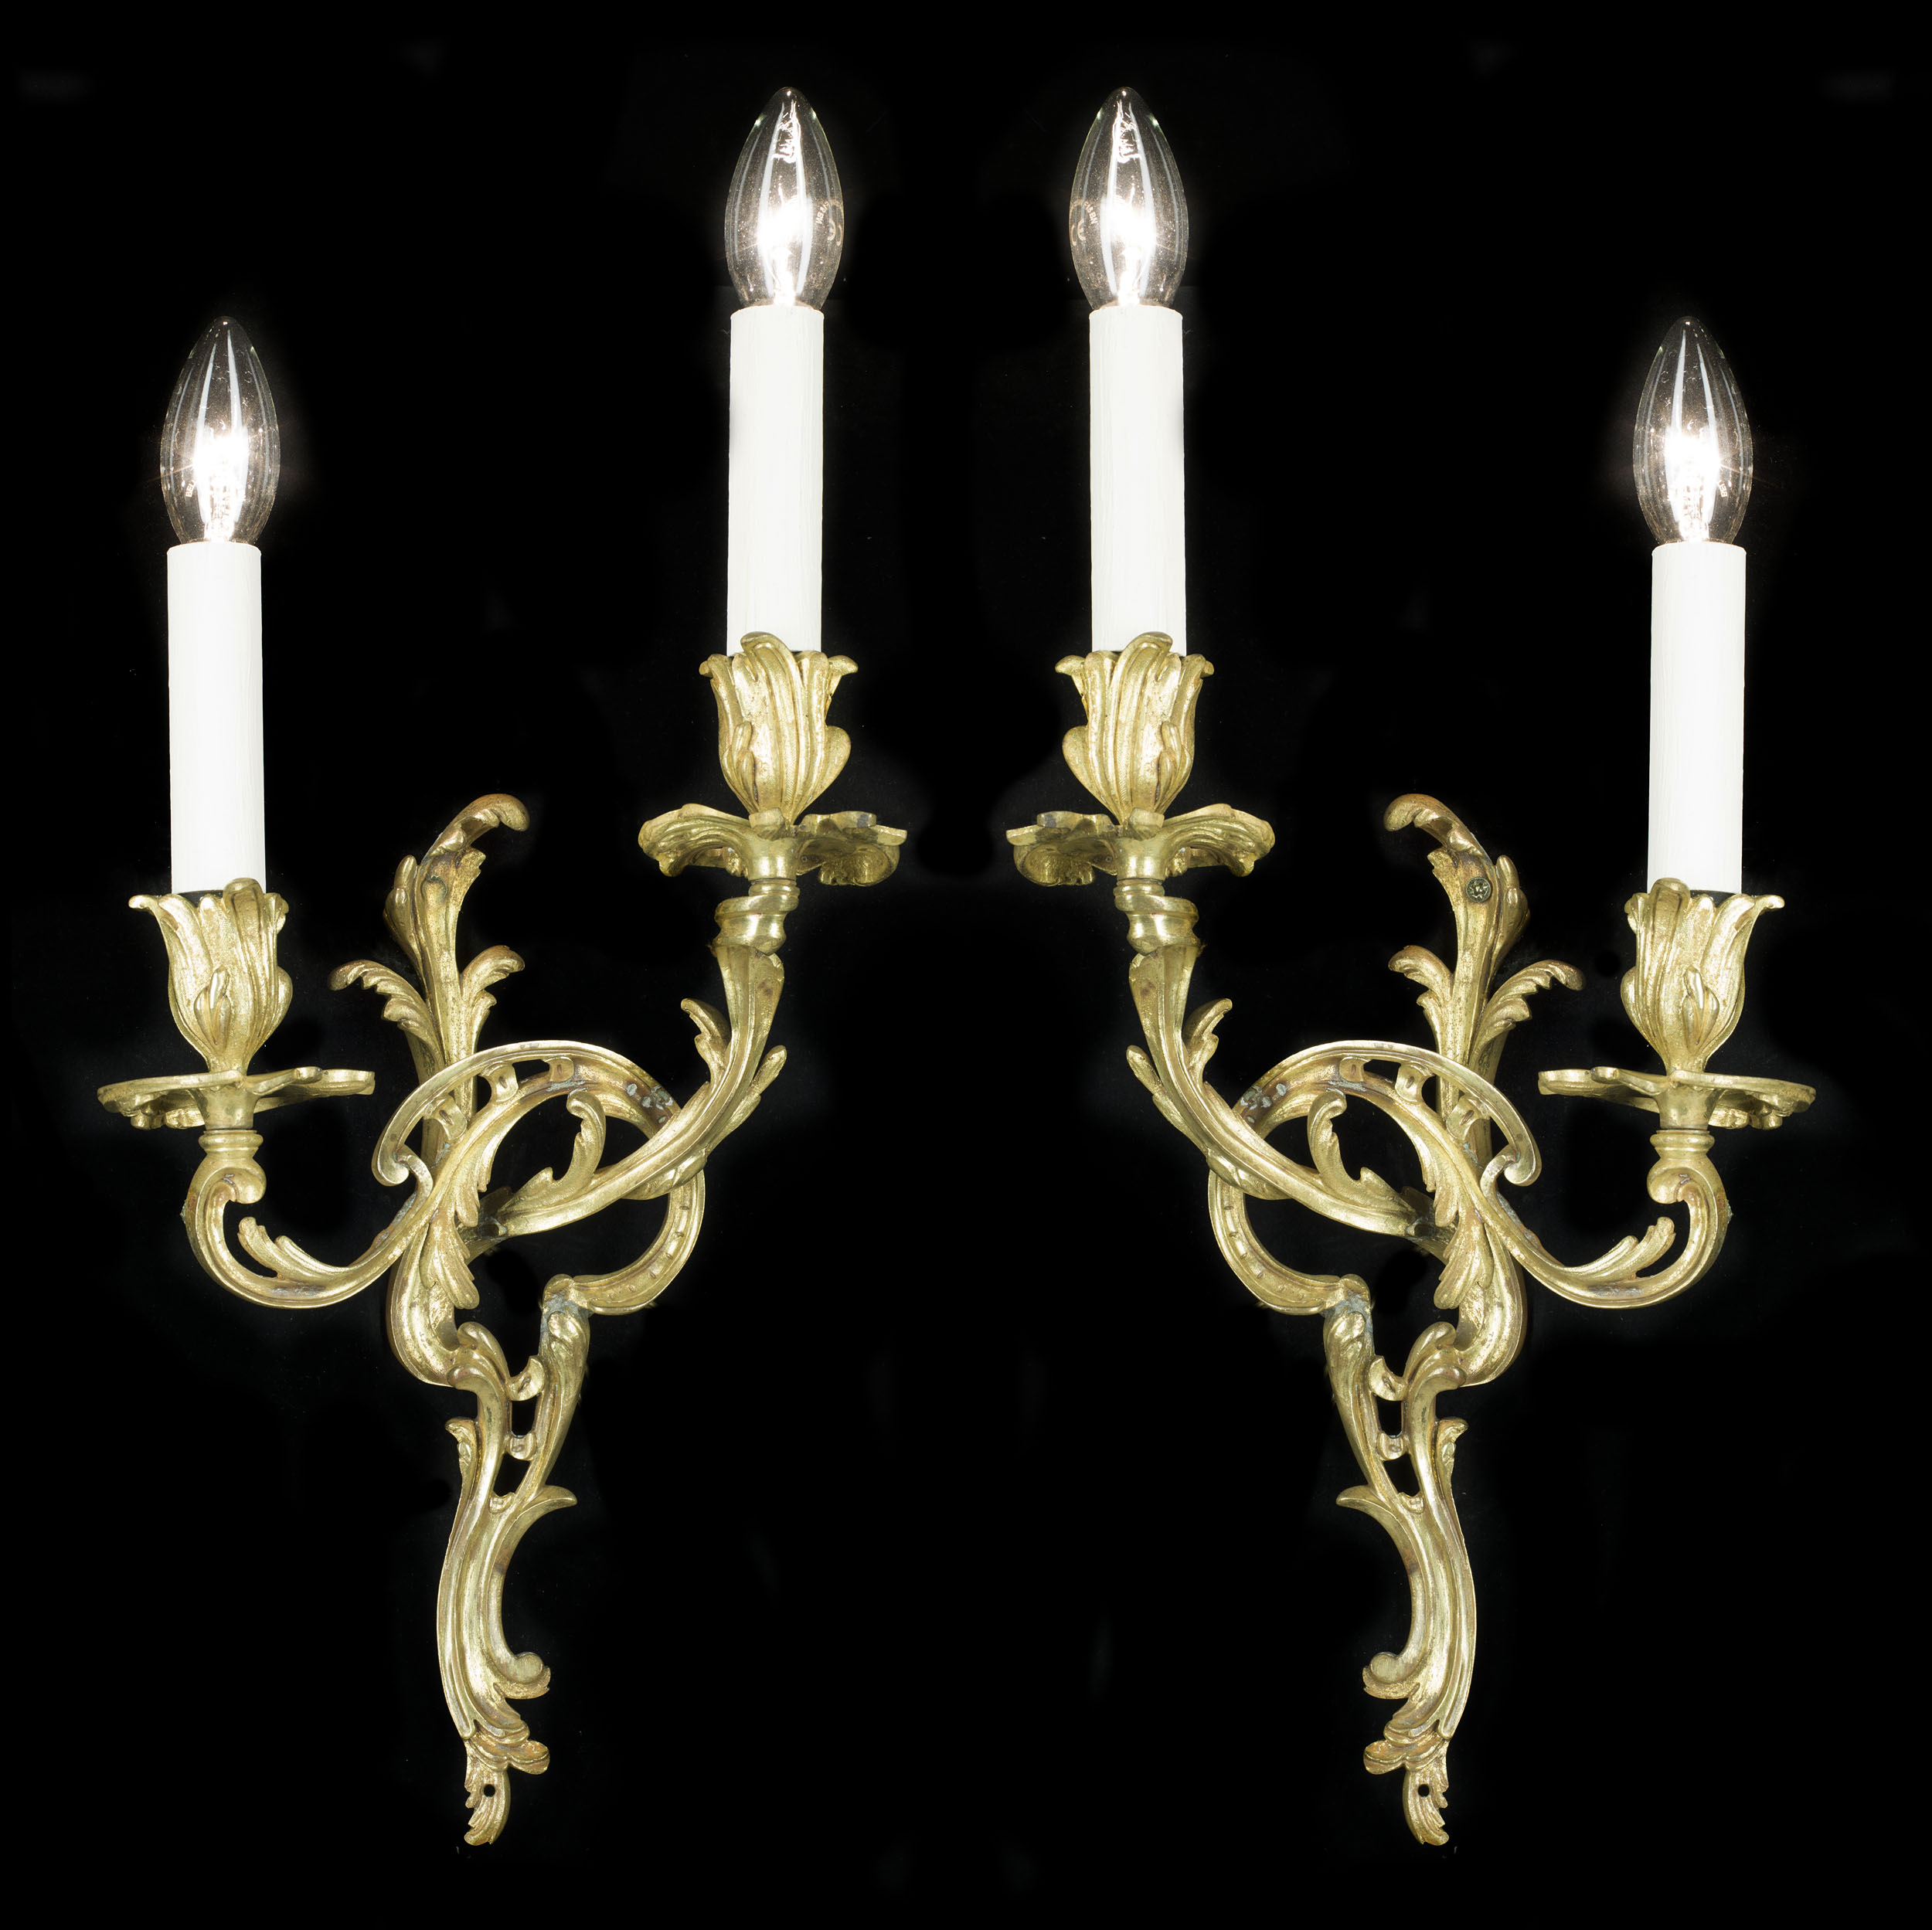 A Rococo Revival Pair of Brass Wall Lights